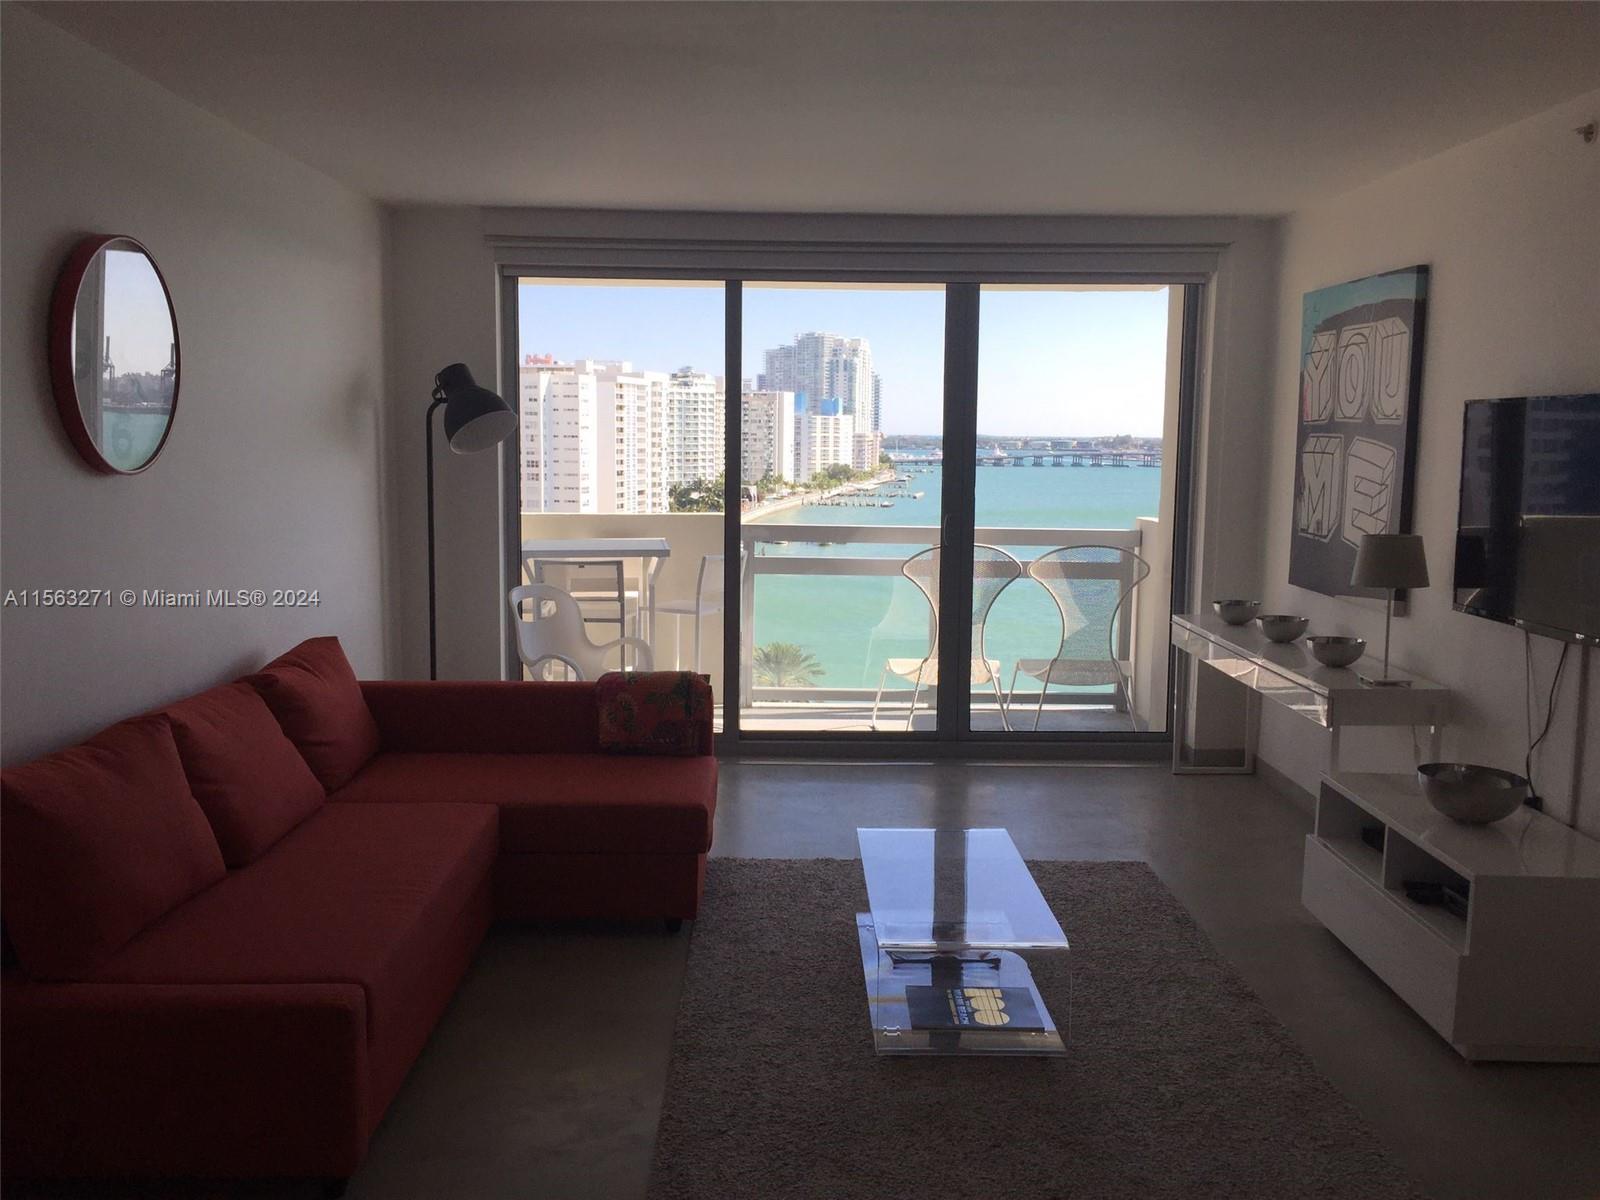 Modern and fully furnished 1 bed /1 bath apartment in the heart of south beach. Has in unit washer/dryer and dishwasher. Wifi and utilities are included. The apt is located in the newly remodeled Flamingo building giving you access to luxury amenities: 2 pools, 2 restaurants, fully renovated gym, and onsite coffee shop. This property is a perfect vacation rental featuring beautiful bay views ideal for sunset. It is centrally located in walking distance to lincoln road shops, a 5 minute Uber to the beach and 15 minutes from brickell, wynwood and design district.